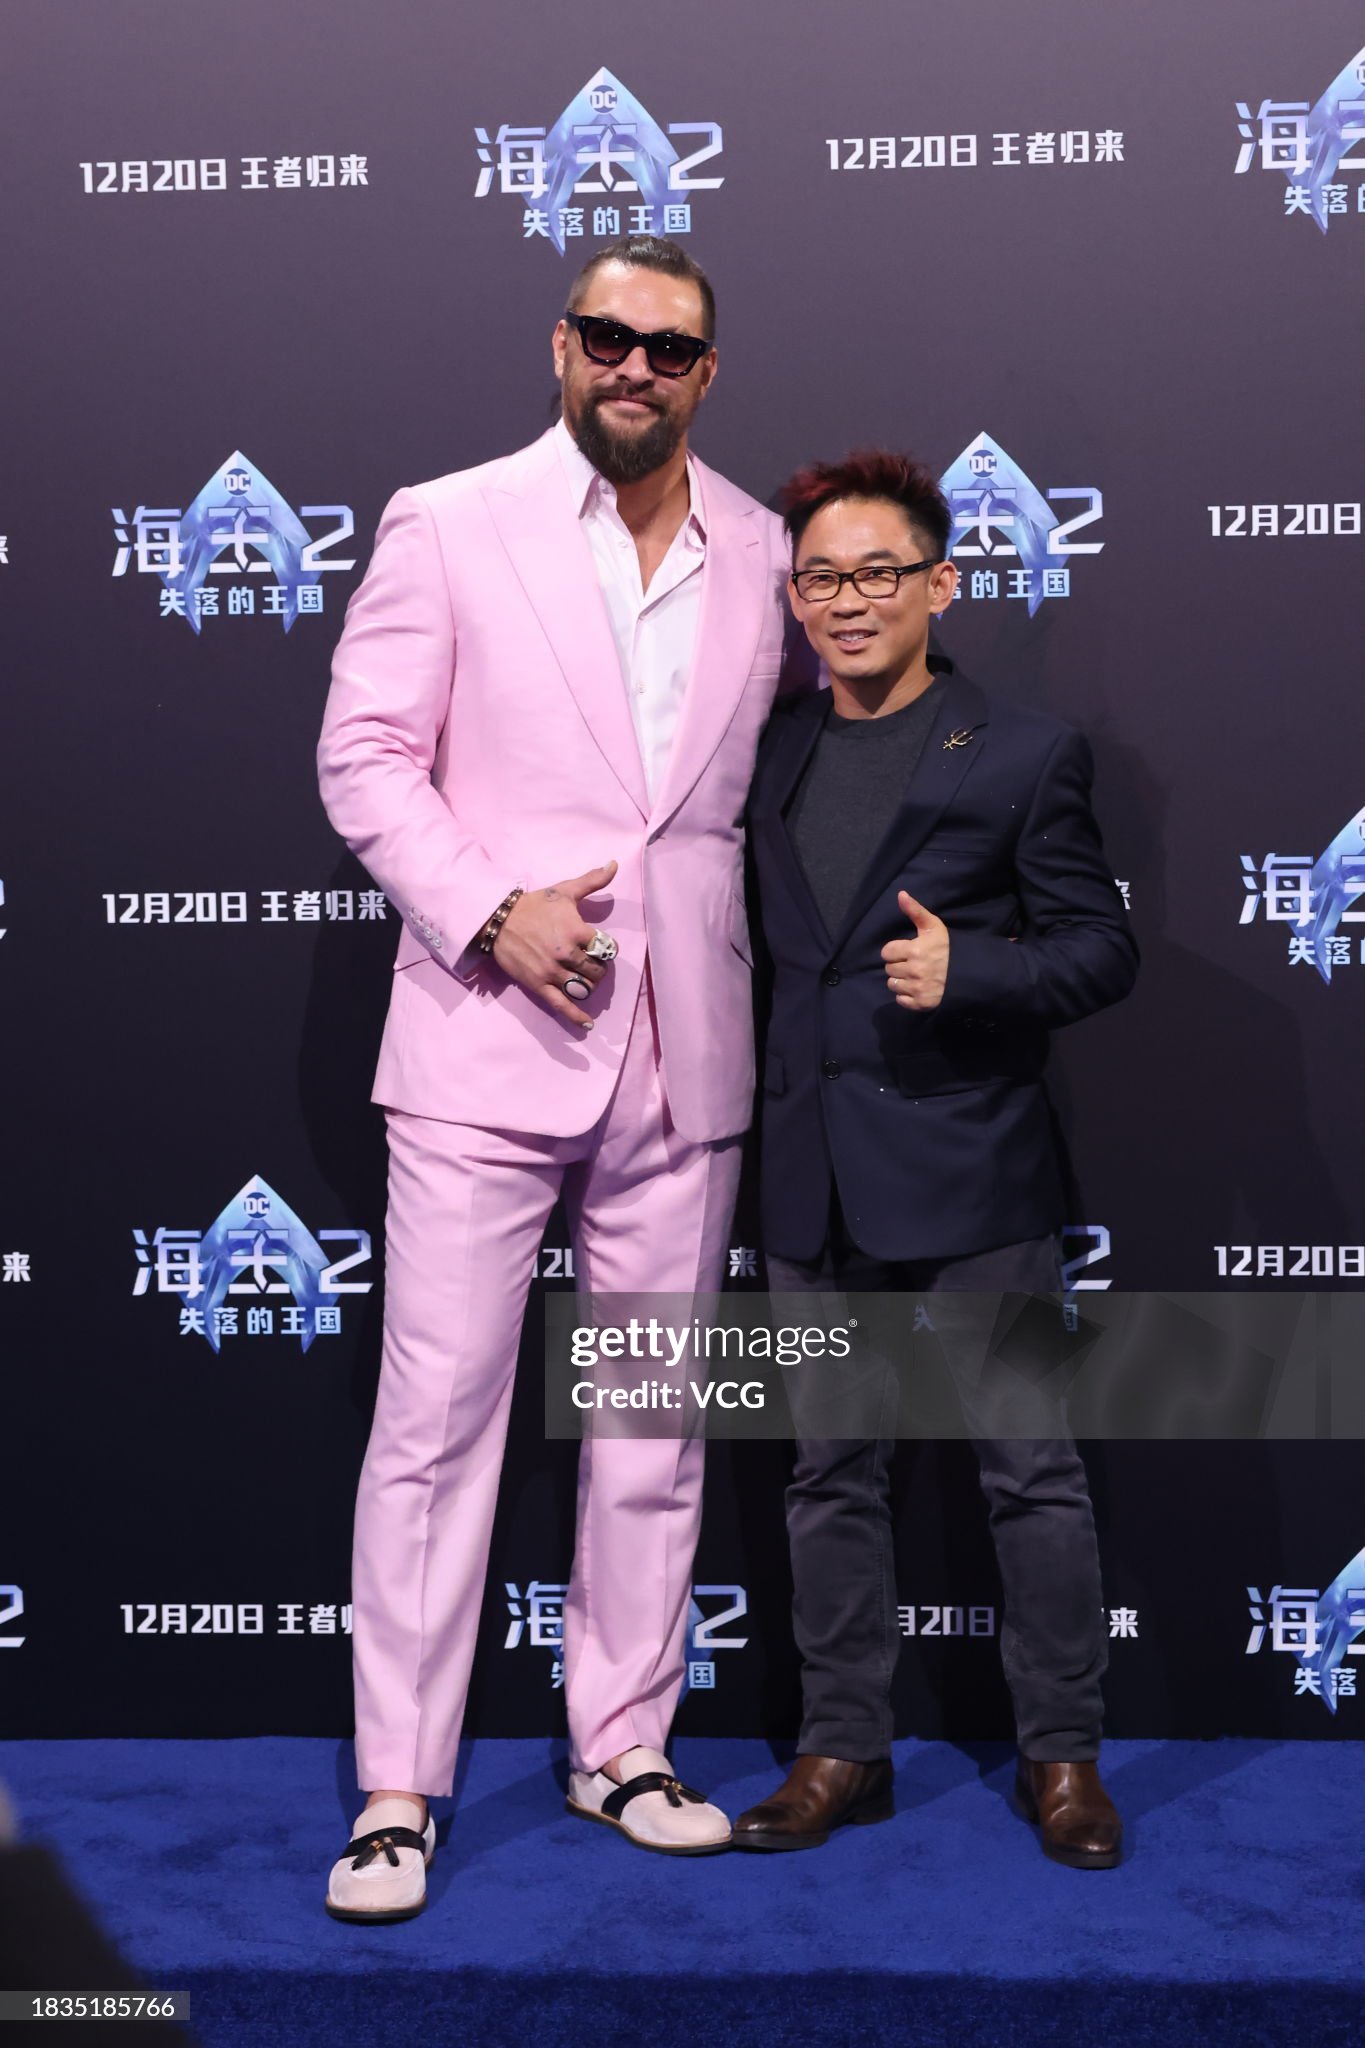 aquaman-and-the-lost-kingdom-beijing-press-conference.jpg